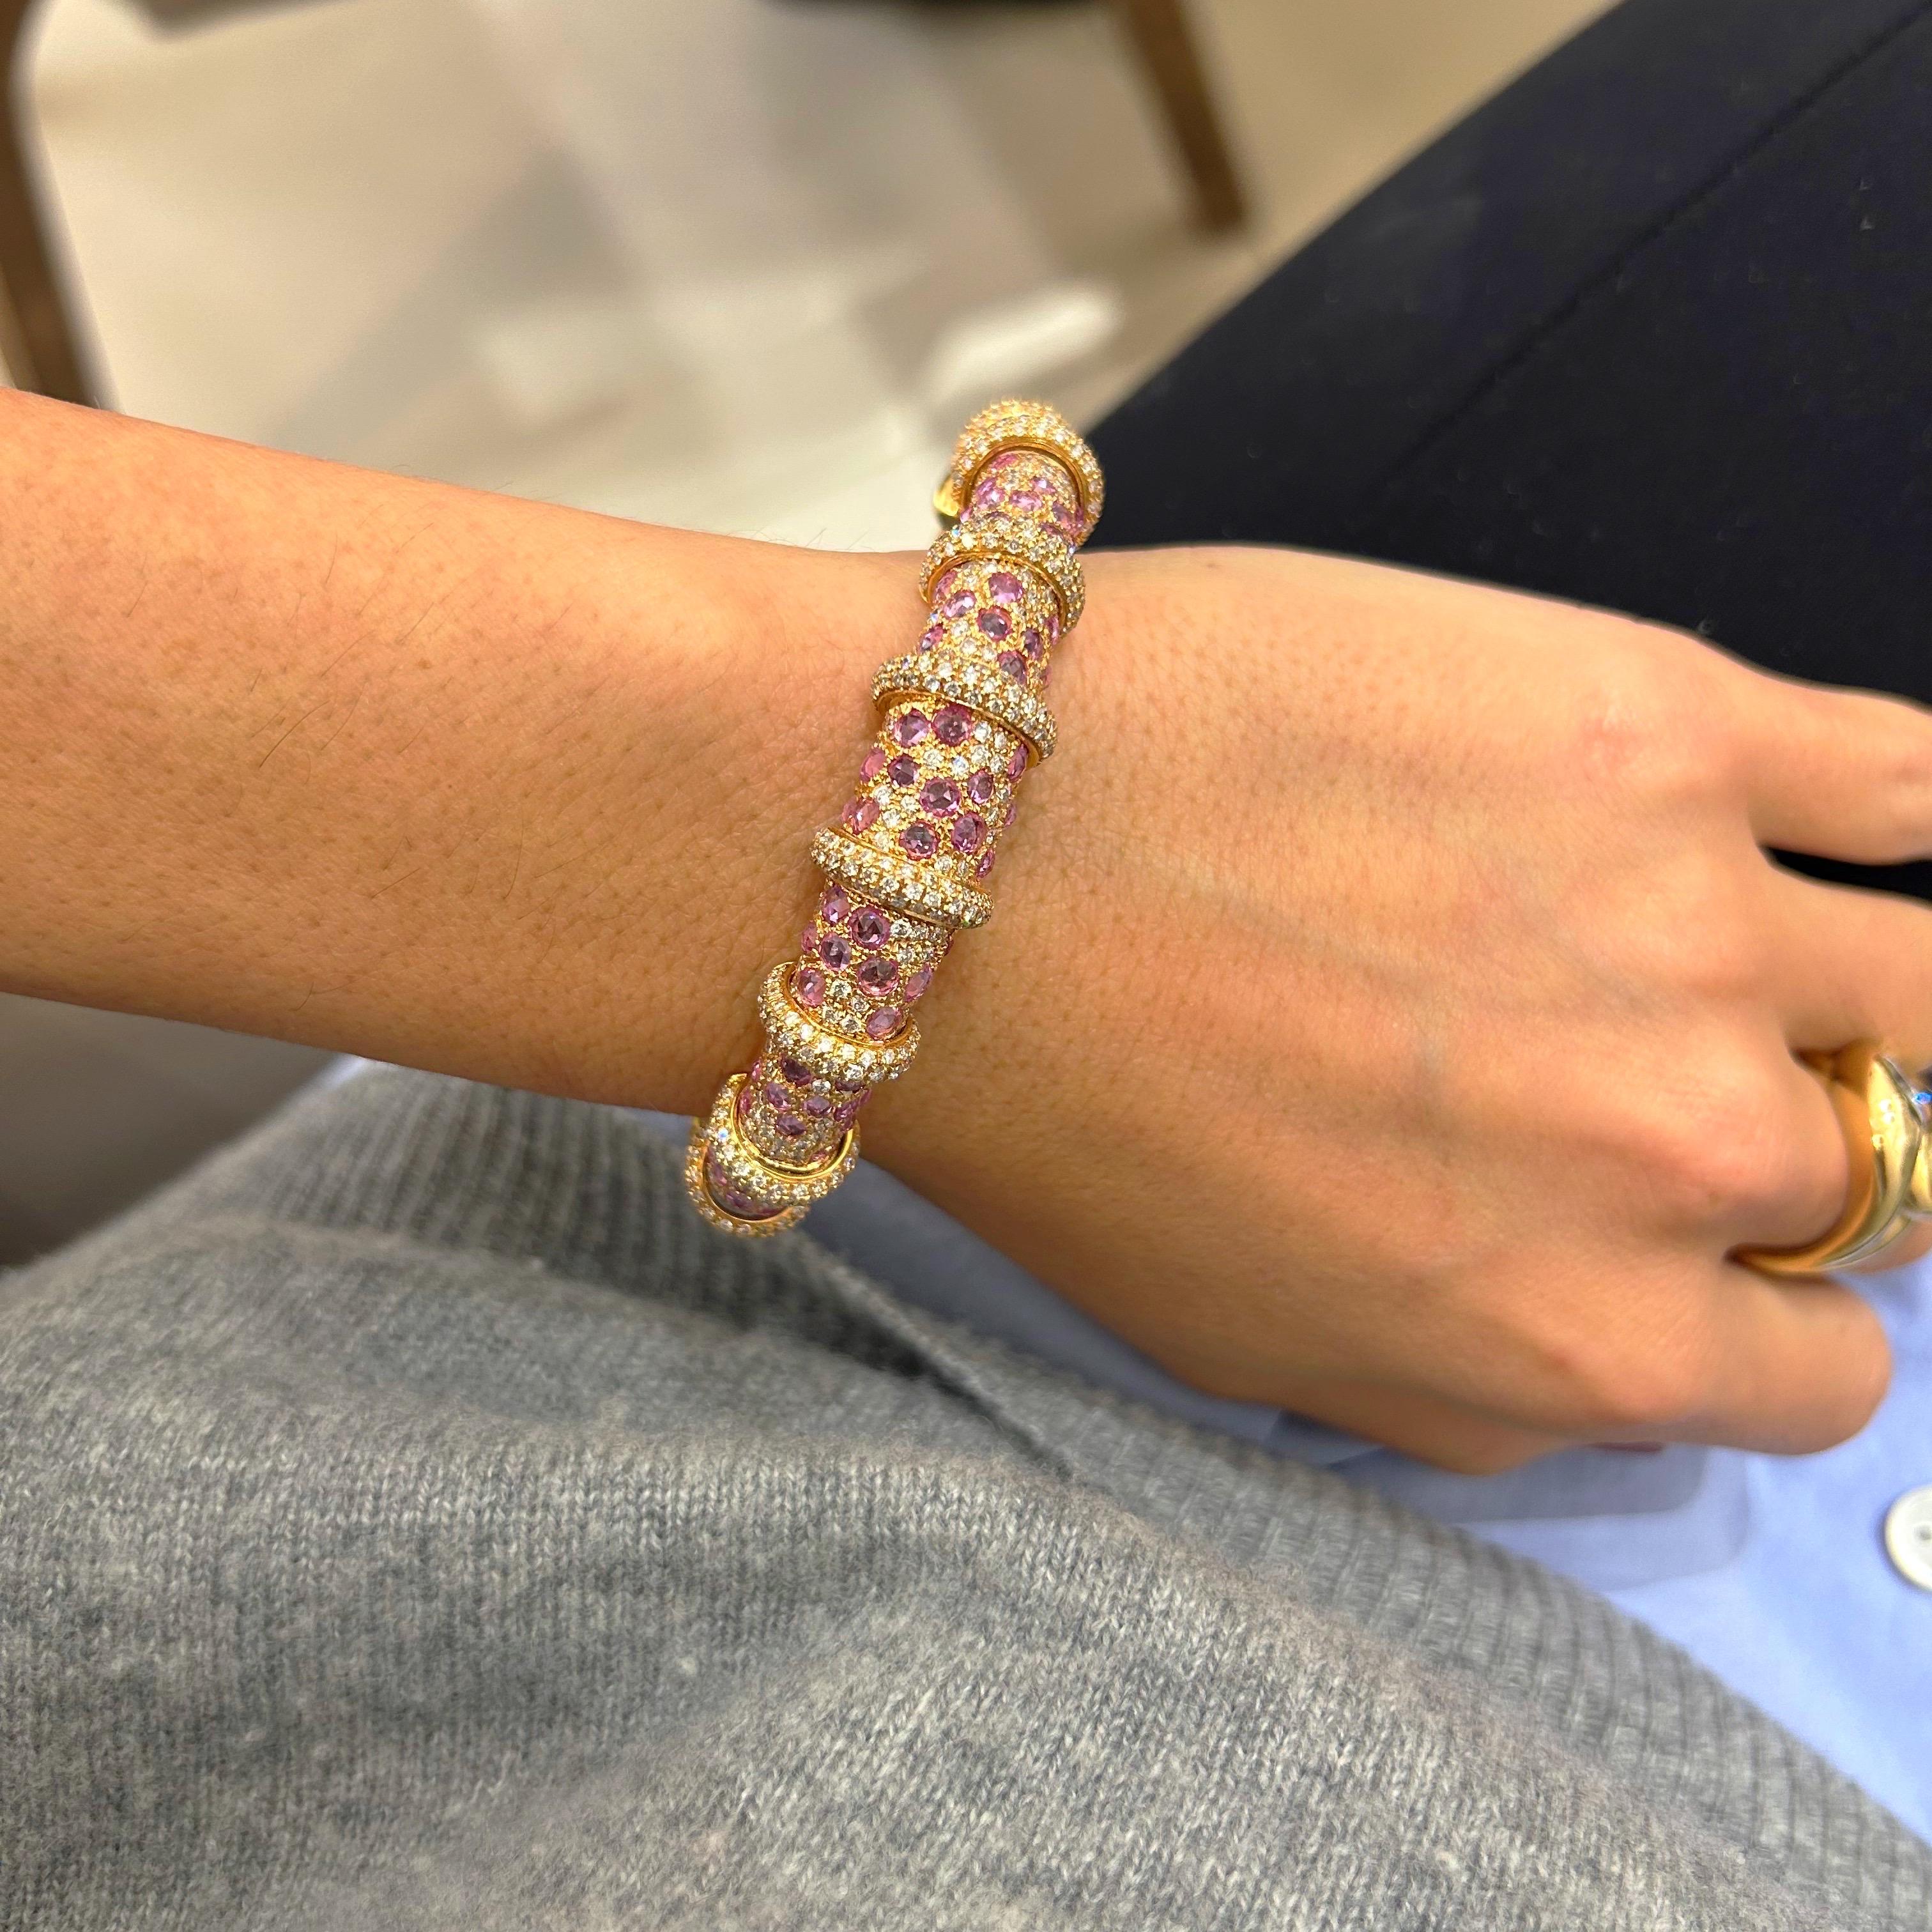 Magnificent 18 karat rose gold bracelet designed by g. Verdi of Italy for Cellini NYC. The bracelet is set  half way around with 7.53 carats of rose cut pink sapphires and 4.45 carats of round brilliant diamonds. There are 4.00 carats off diamonds